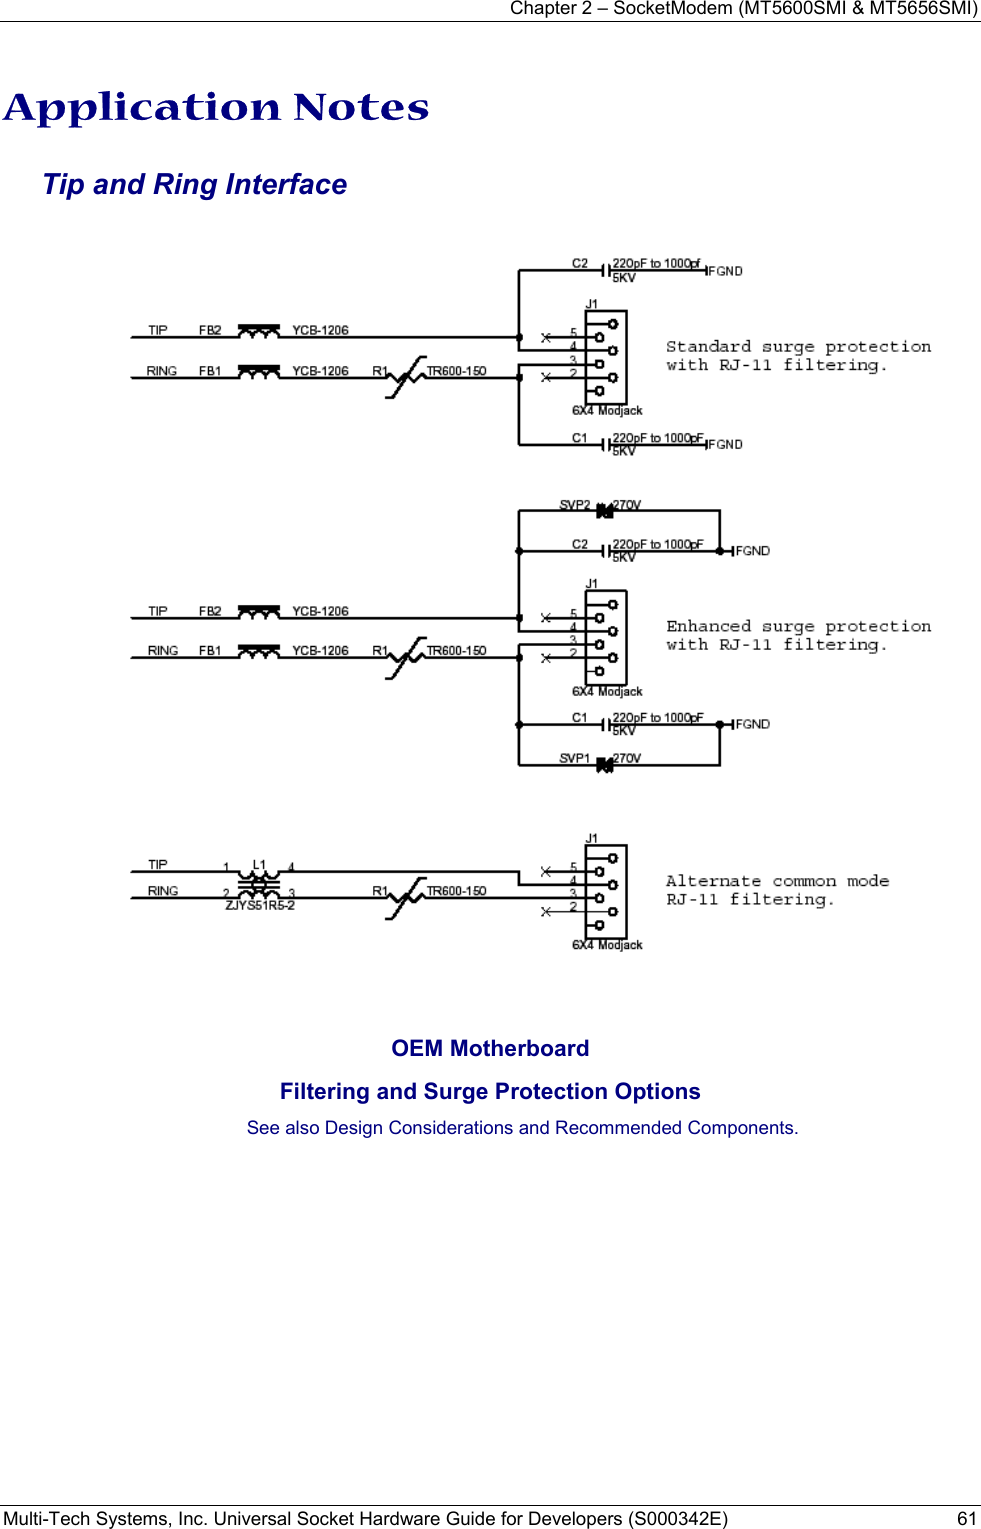 Chapter 2 – SocketModem (MT5600SMI &amp; MT5656SMI) Multi-Tech Systems, Inc. Universal Socket Hardware Guide for Developers (S000342E)  61  Application Notes Tip and Ring Interface       OEM Motherboard Filtering and Surge Protection Options See also Design Considerations and Recommended Components.